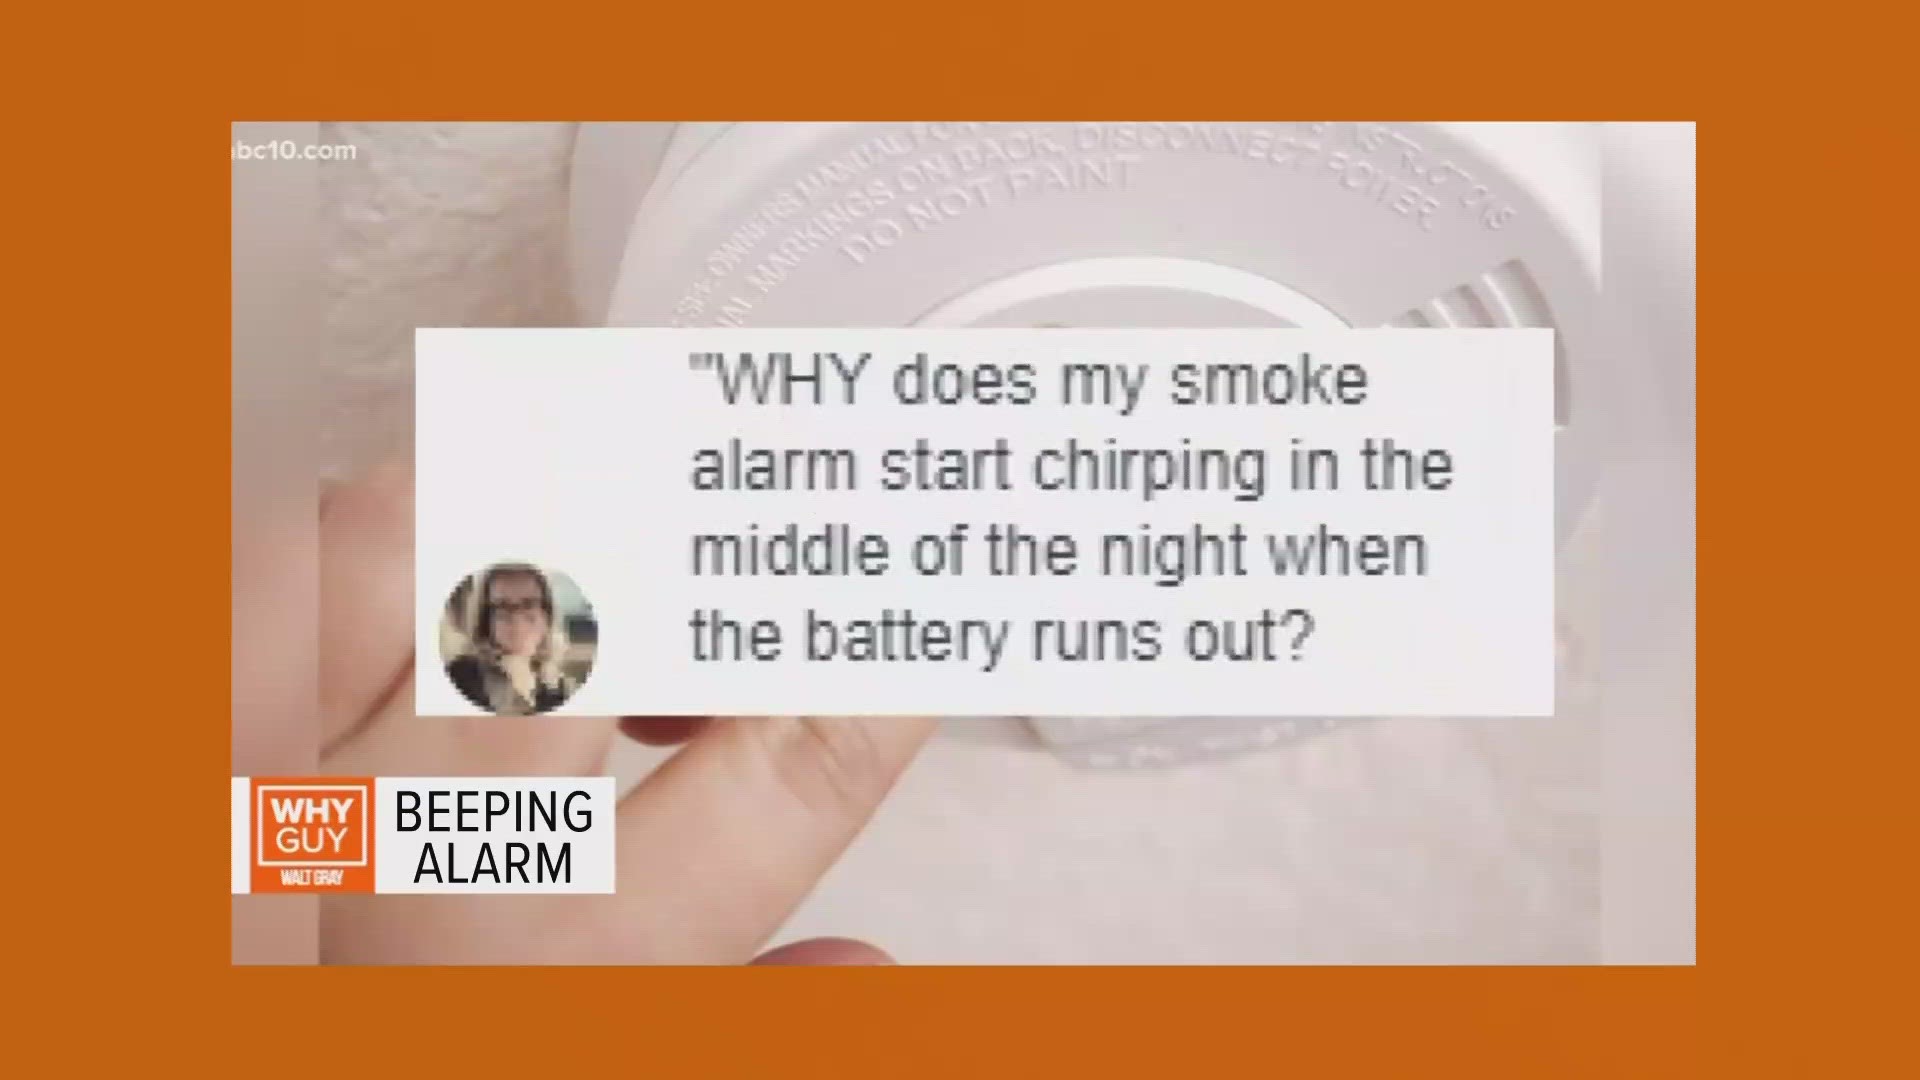 Why does my smoke alarm start chirping in the middle of the night when the battery runs out? Why Guy explains more.